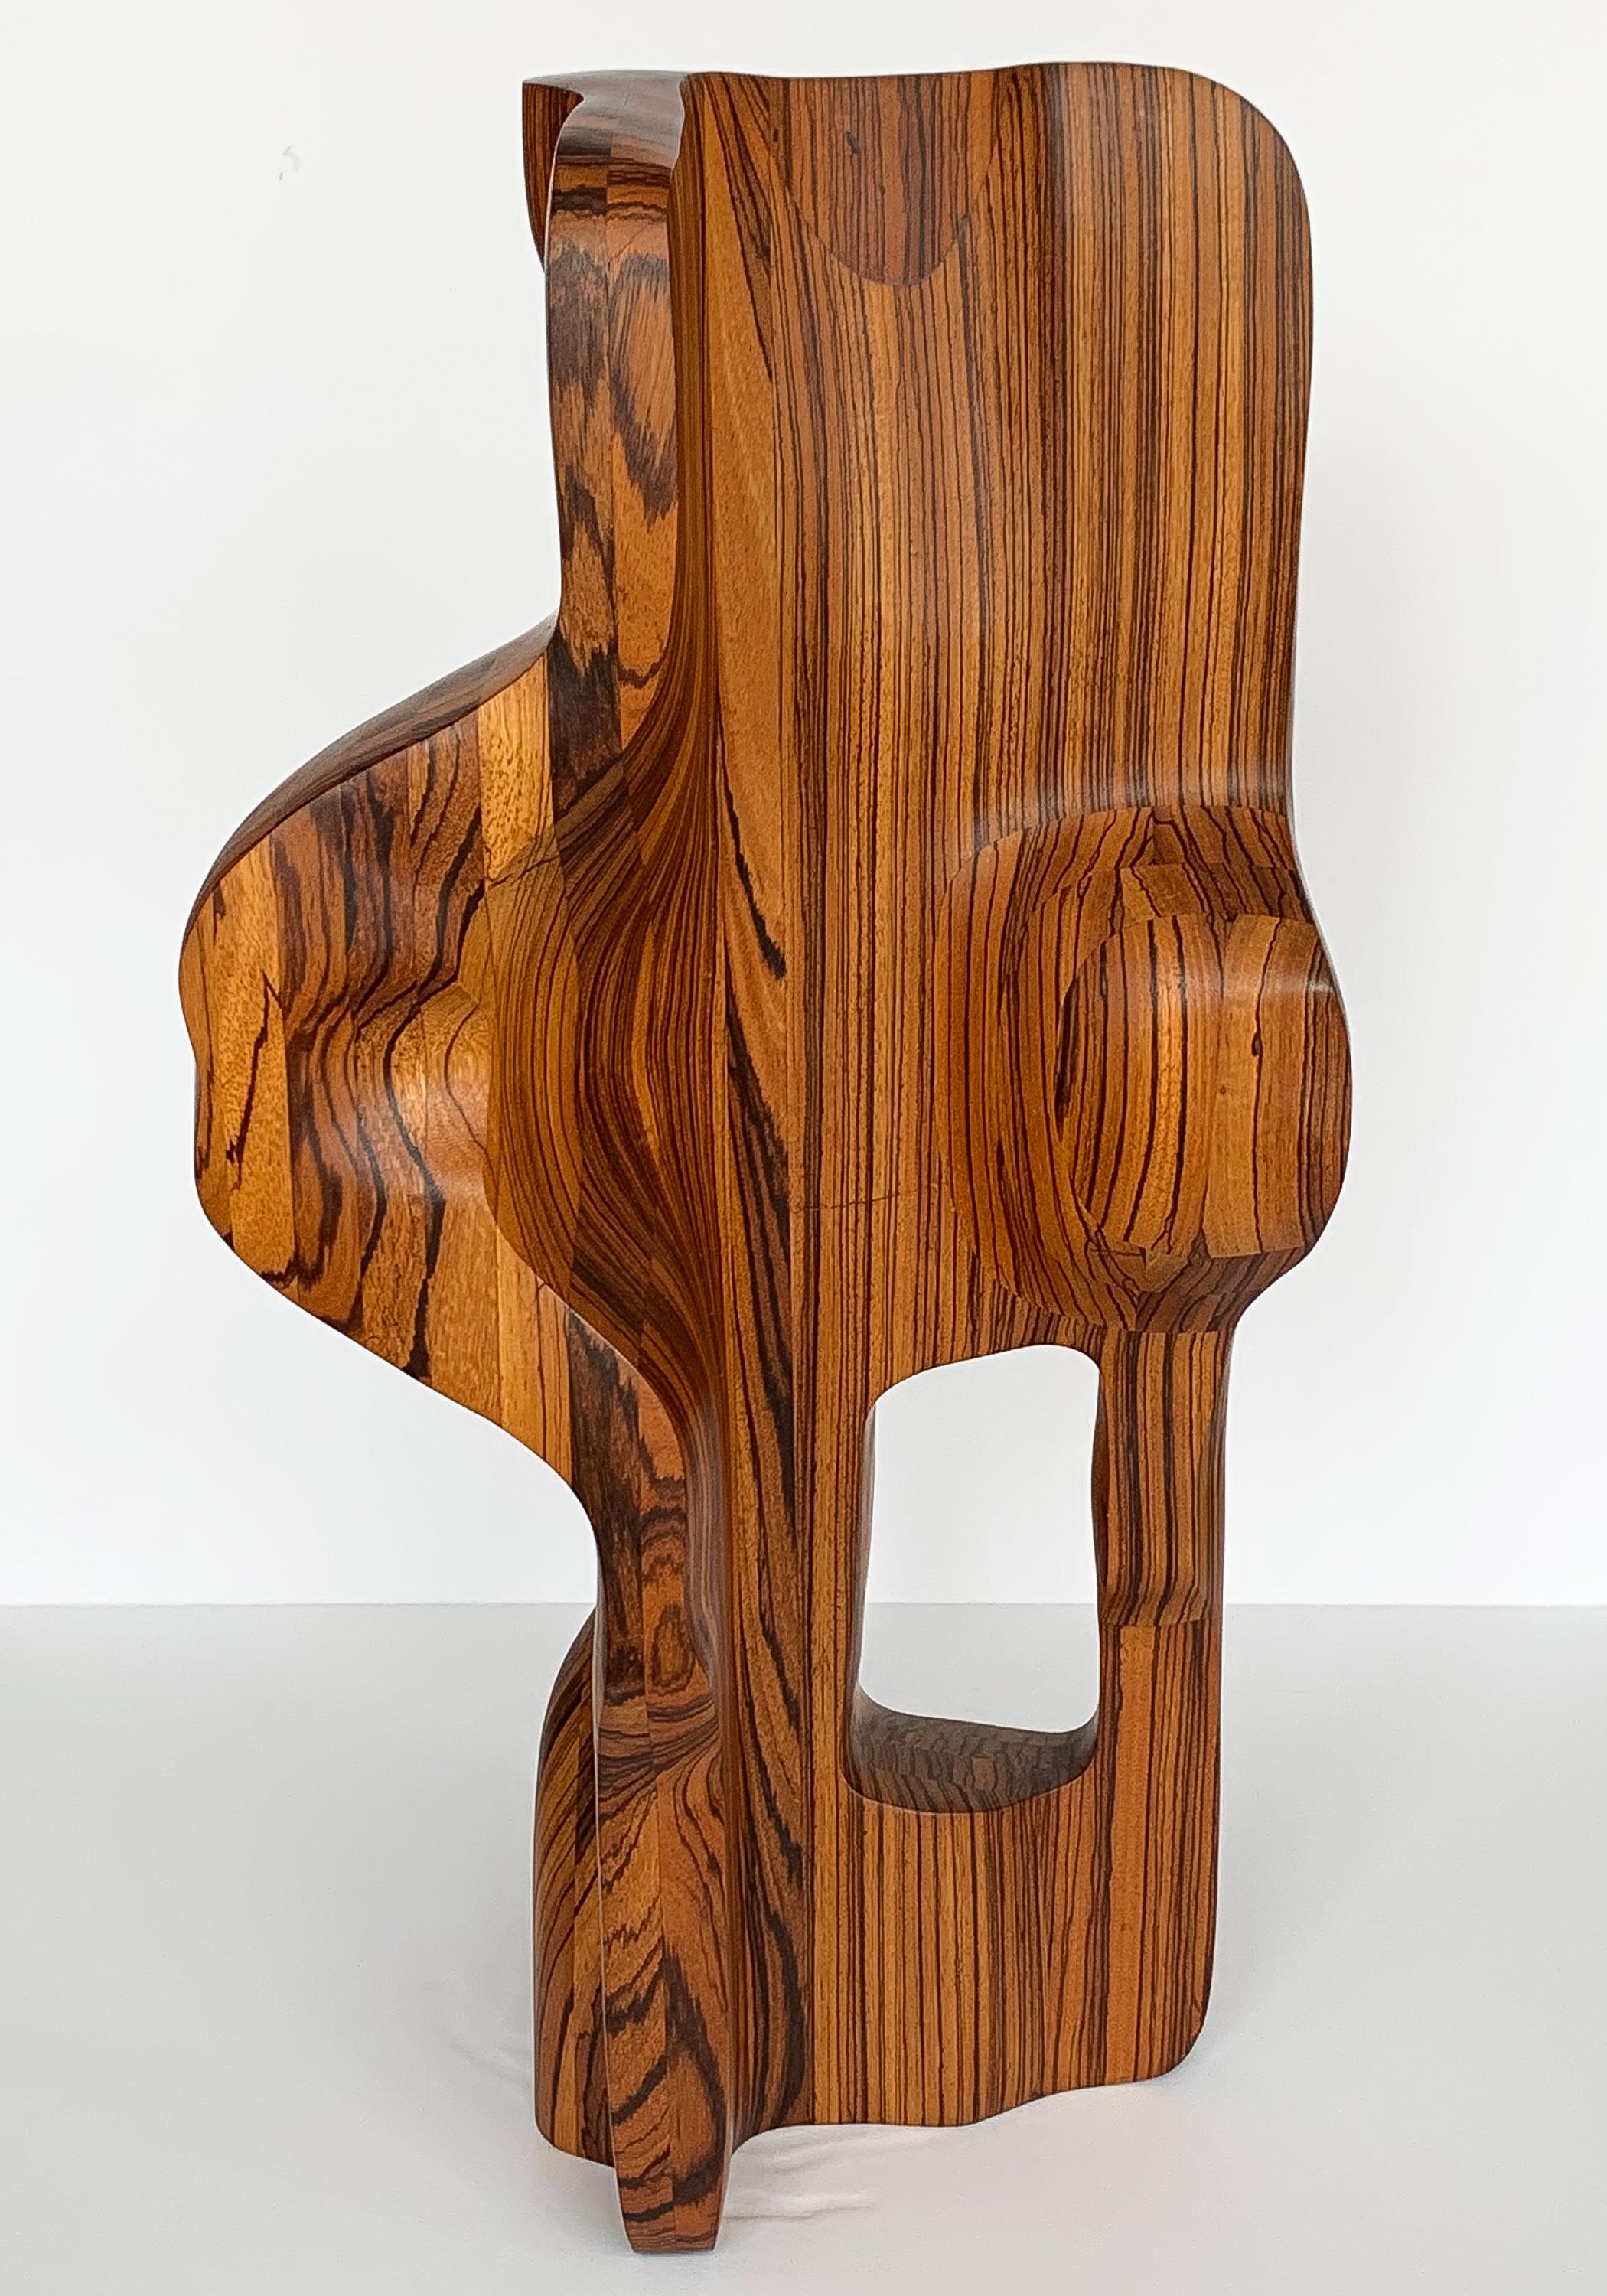 Monumental Abstract Carved Zebrawood Sculpture by John Campbell 1